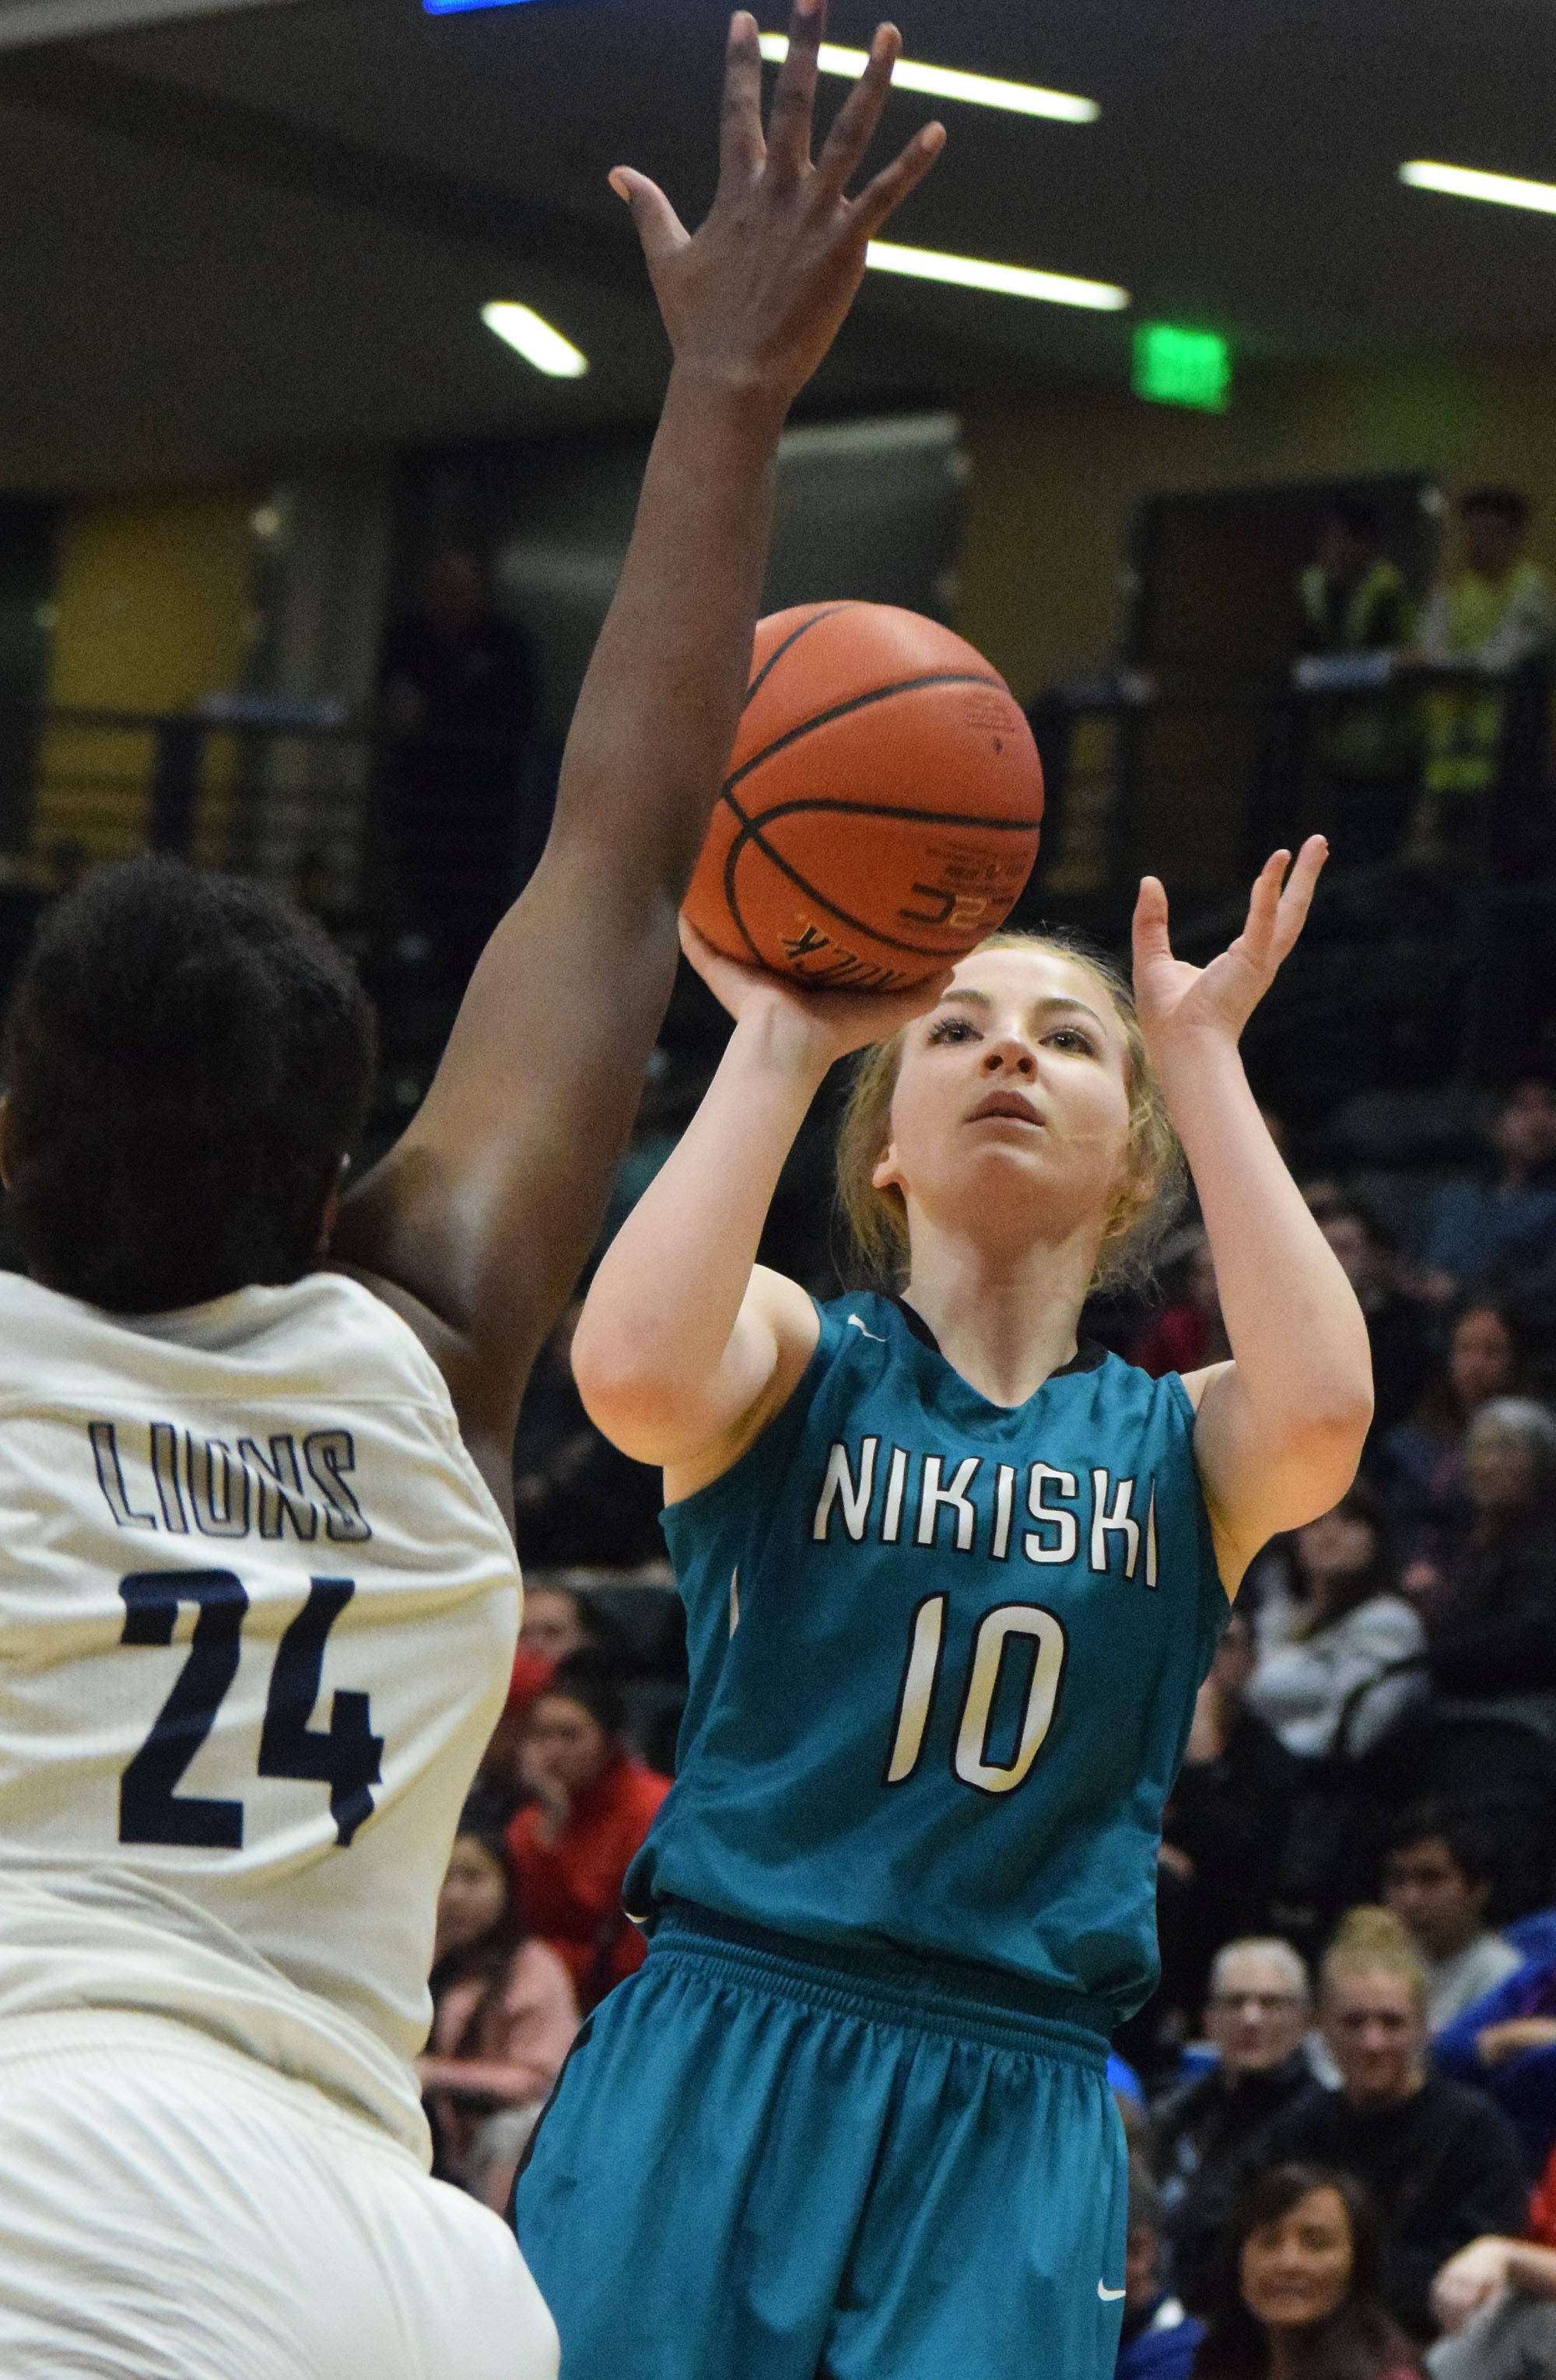 Nikiski’s Lillian Carstens unleashes a 3-pointer Saturday, March 23, 2019, against ACS in the Class 3A girls state basketball championship at the Alaska Airlines Center in Anchorage. (Photo by Joey Klecka/Peninsula Clarion)